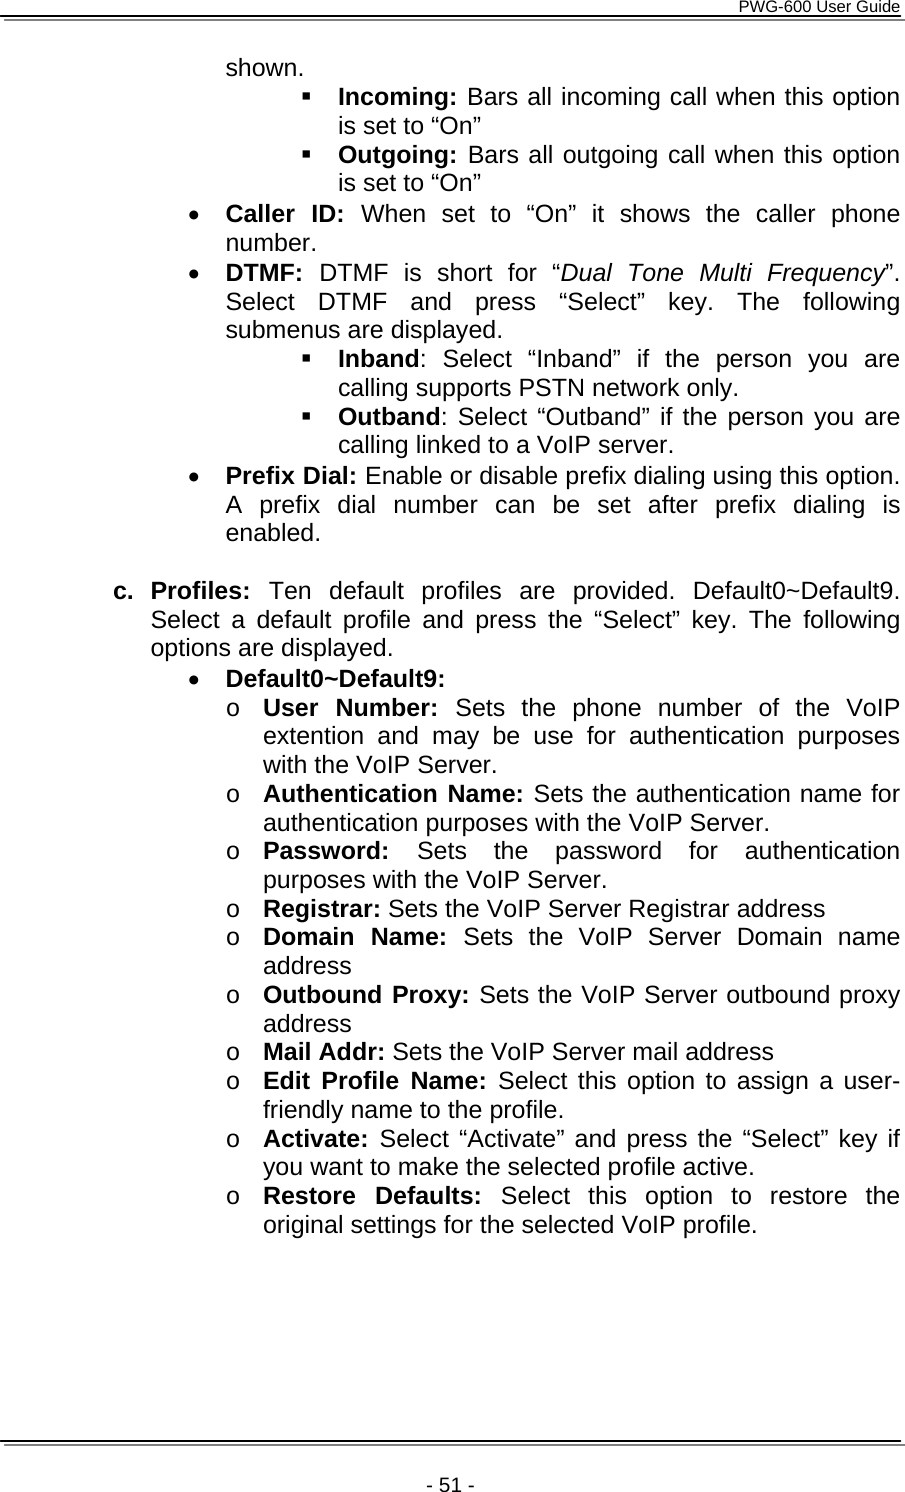      PWG-600 User Guide    - 51 - shown.  Incoming: Bars all incoming call when this option is set to “On”  Outgoing: Bars all outgoing call when this option is set to “On” • Caller ID: When set to “On” it shows the caller phone number.  • DTMF:  DTMF is short for “Dual Tone Multi Frequency”. Select DTMF and press “Select” key. The following submenus are displayed.  Inband: Select “Inband” if the person you are calling supports PSTN network only.  Outband: Select “Outband” if the person you are calling linked to a VoIP server. • Prefix Dial: Enable or disable prefix dialing using this option. A prefix dial number can be set after prefix dialing is enabled.  c. Profiles: Ten default profiles are provided. Default0~Default9. Select a default profile and press the “Select” key. The following options are displayed. • Default0~Default9: o User Number: Sets the phone number of the VoIP extention and may be use for authentication purposes with the VoIP Server.  o Authentication Name: Sets the authentication name for authentication purposes with the VoIP Server. o Password:  Sets the password for authentication purposes with the VoIP Server. o Registrar: Sets the VoIP Server Registrar address o Domain Name: Sets the VoIP Server Domain name address o Outbound Proxy: Sets the VoIP Server outbound proxy address o Mail Addr: Sets the VoIP Server mail address o Edit Profile Name: Select this option to assign a user-friendly name to the profile. o Activate: Select “Activate” and press the “Select” key if you want to make the selected profile active. o Restore Defaults: Select this option to restore the original settings for the selected VoIP profile.  